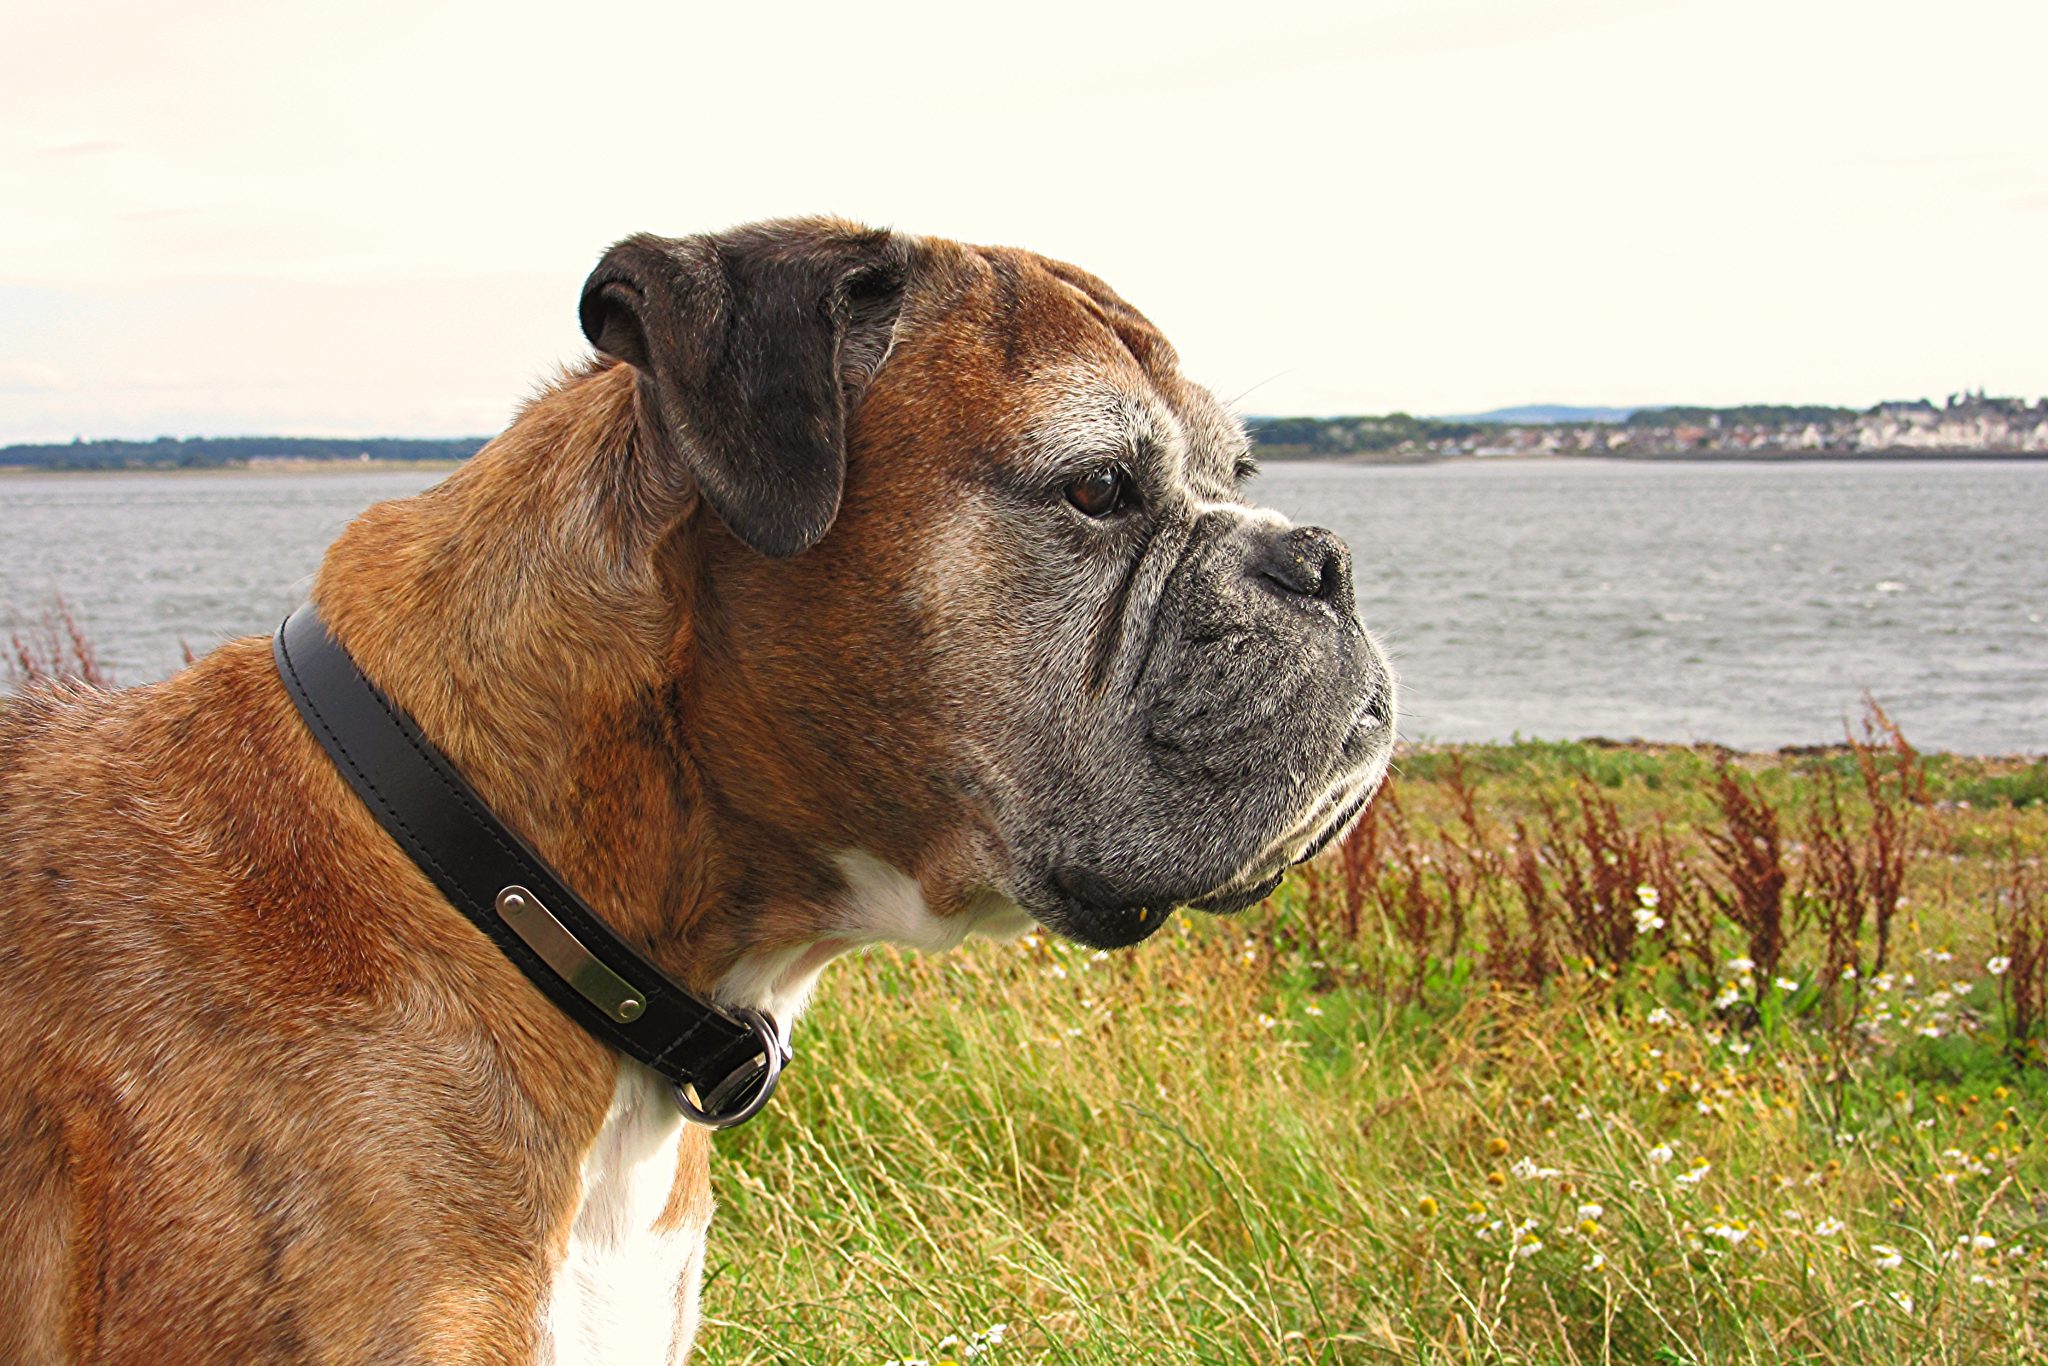 Boxer dog bloating issue - Symptoms, Treatment, and Prevention ...